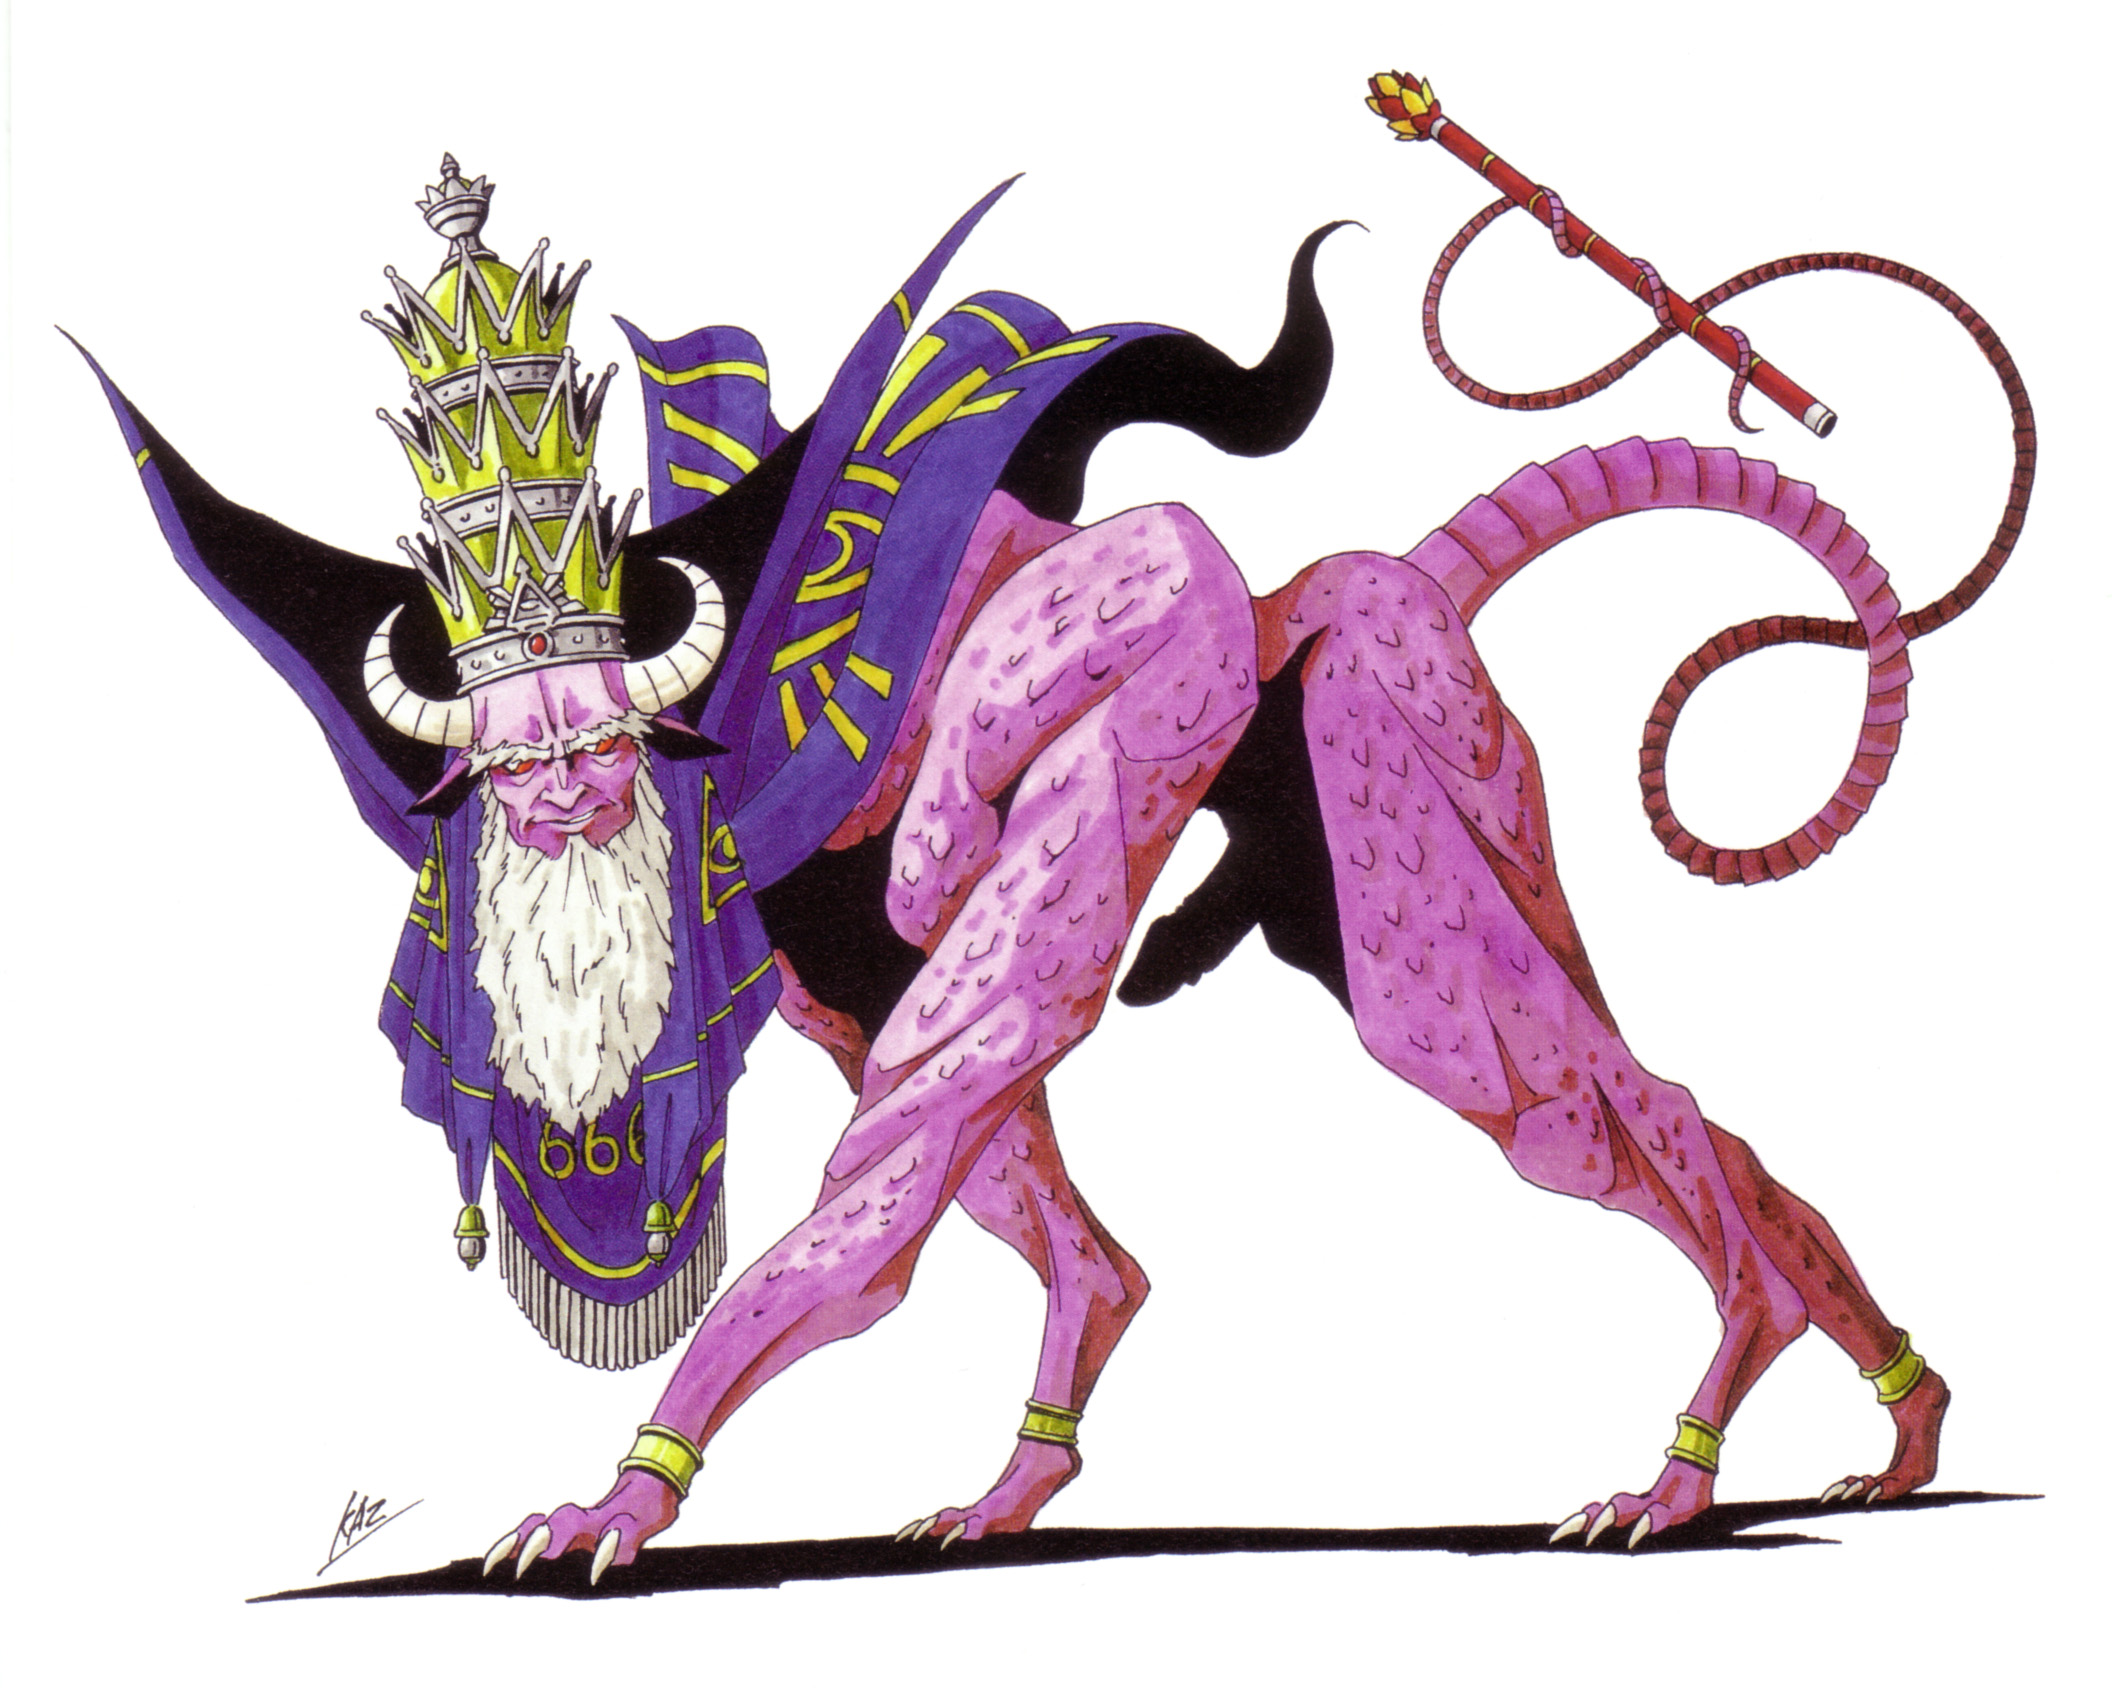 Master Therion Megami Tensei Wiki A Demonic Compendium Of Your True Self